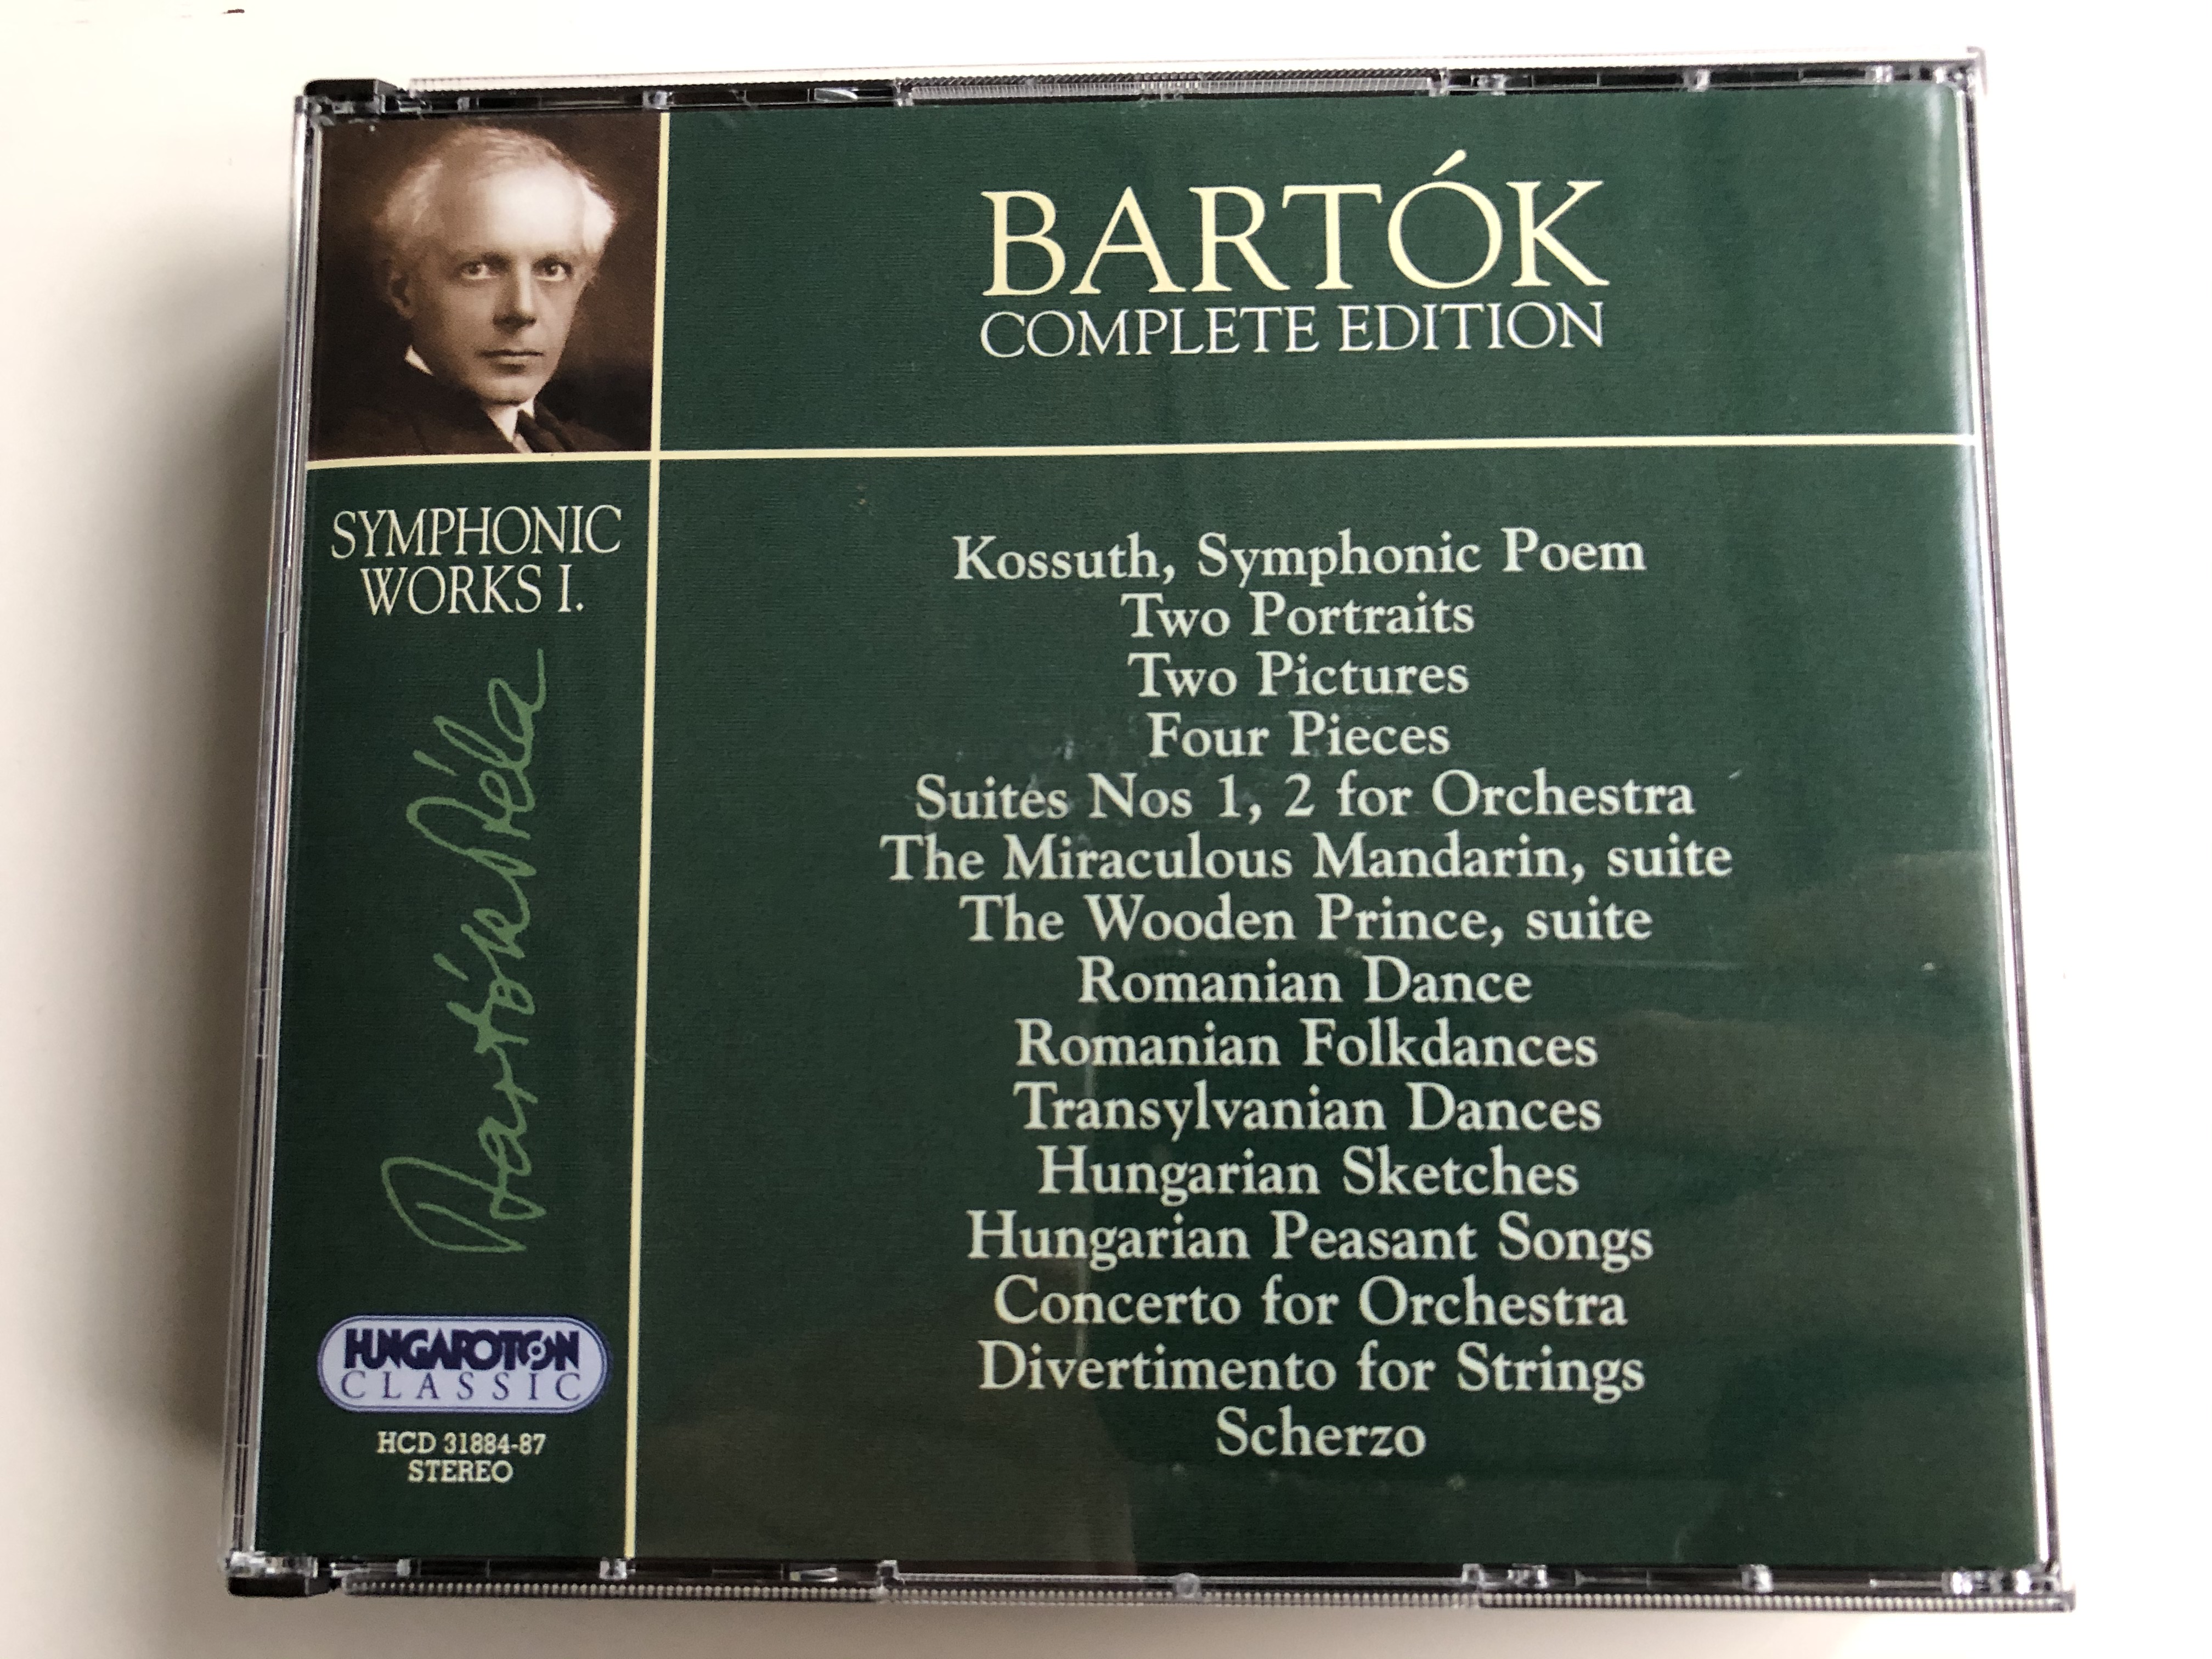 bartok-complete-edition-symphonic-works-i.-kossuth-symphonic-poem-two-portraits-two-picture-four-pieces-suites-nos.-1-2-for-orchestra-the-miraculous-mandarin-suite-hungaroton-classic-4x-1-.jpg